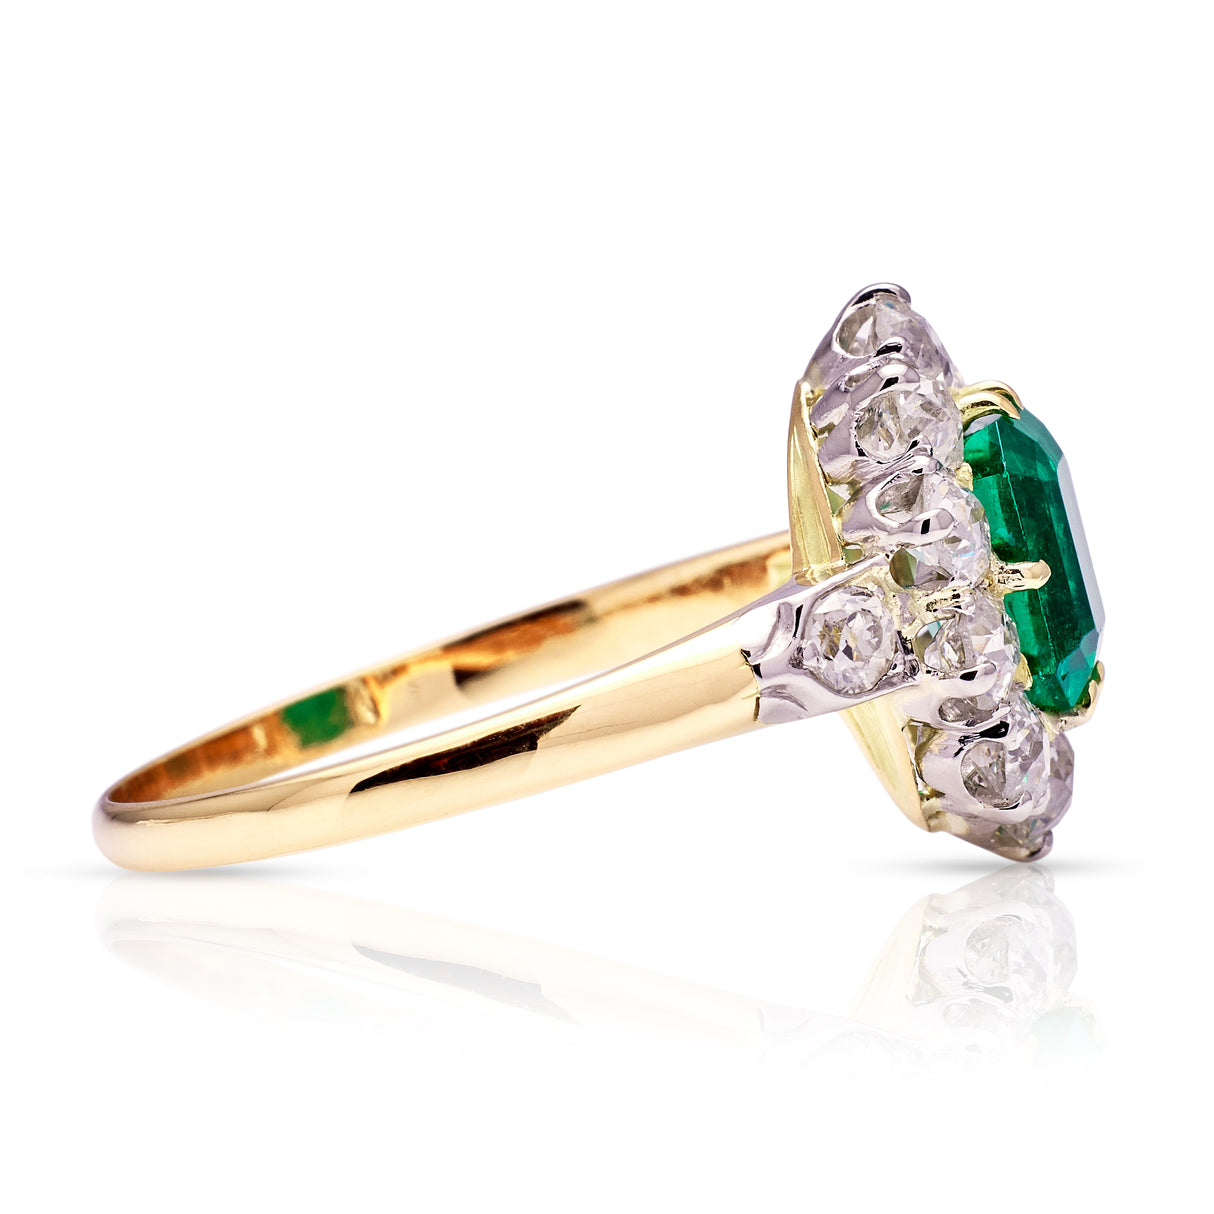 Antique, Edwardian Emerald and Diamond Engagement Ring, 18ct Yellow Gold rear view